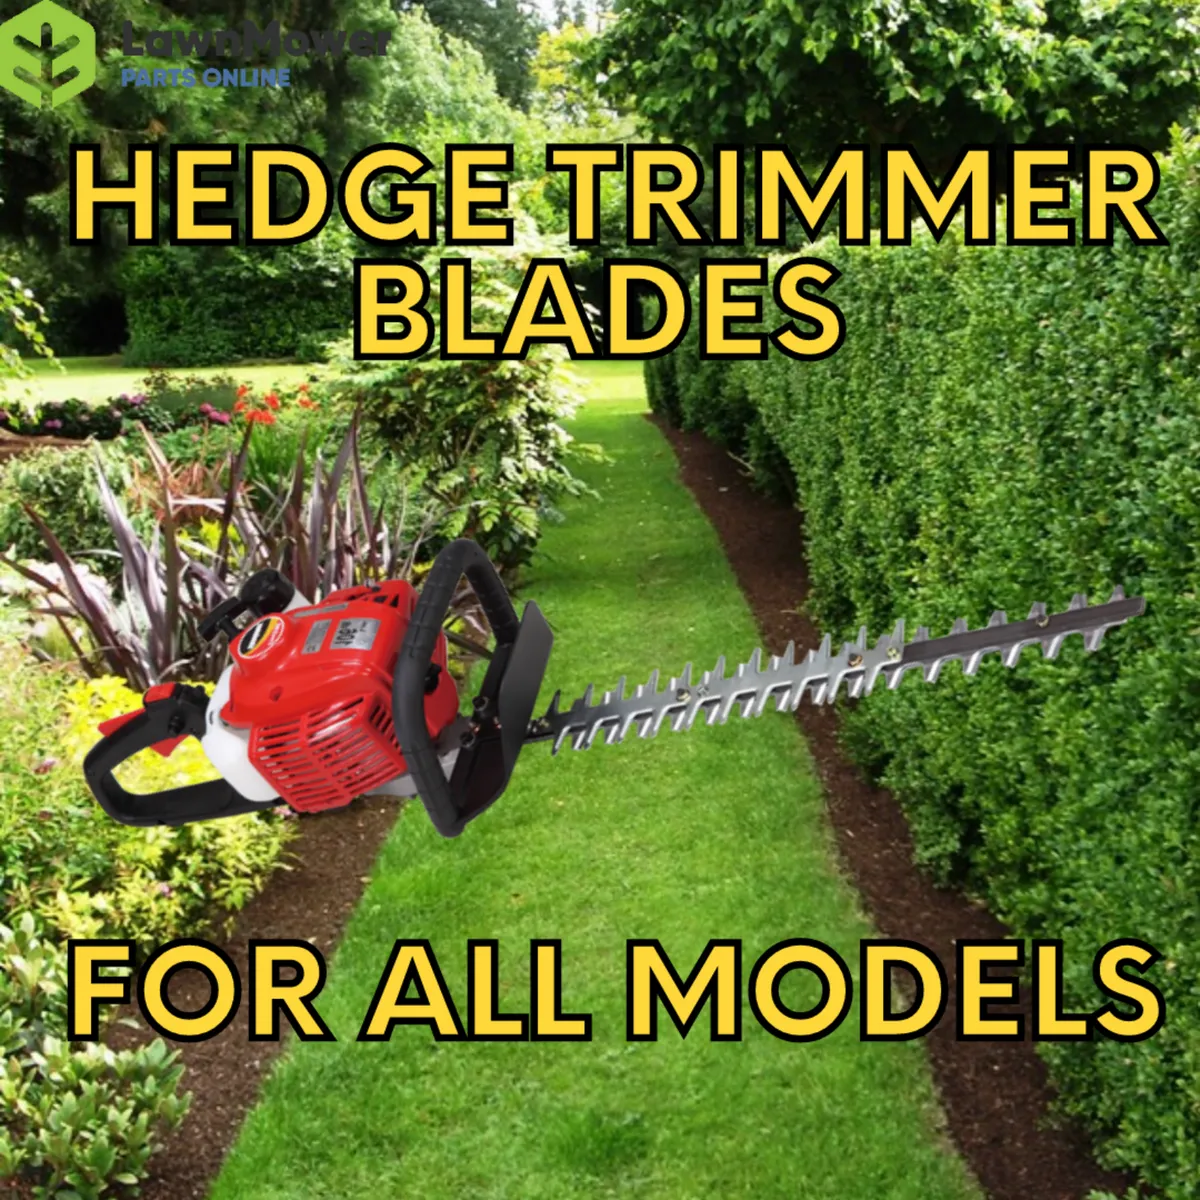 Hedgetrimmer Blades - FREE Delivery